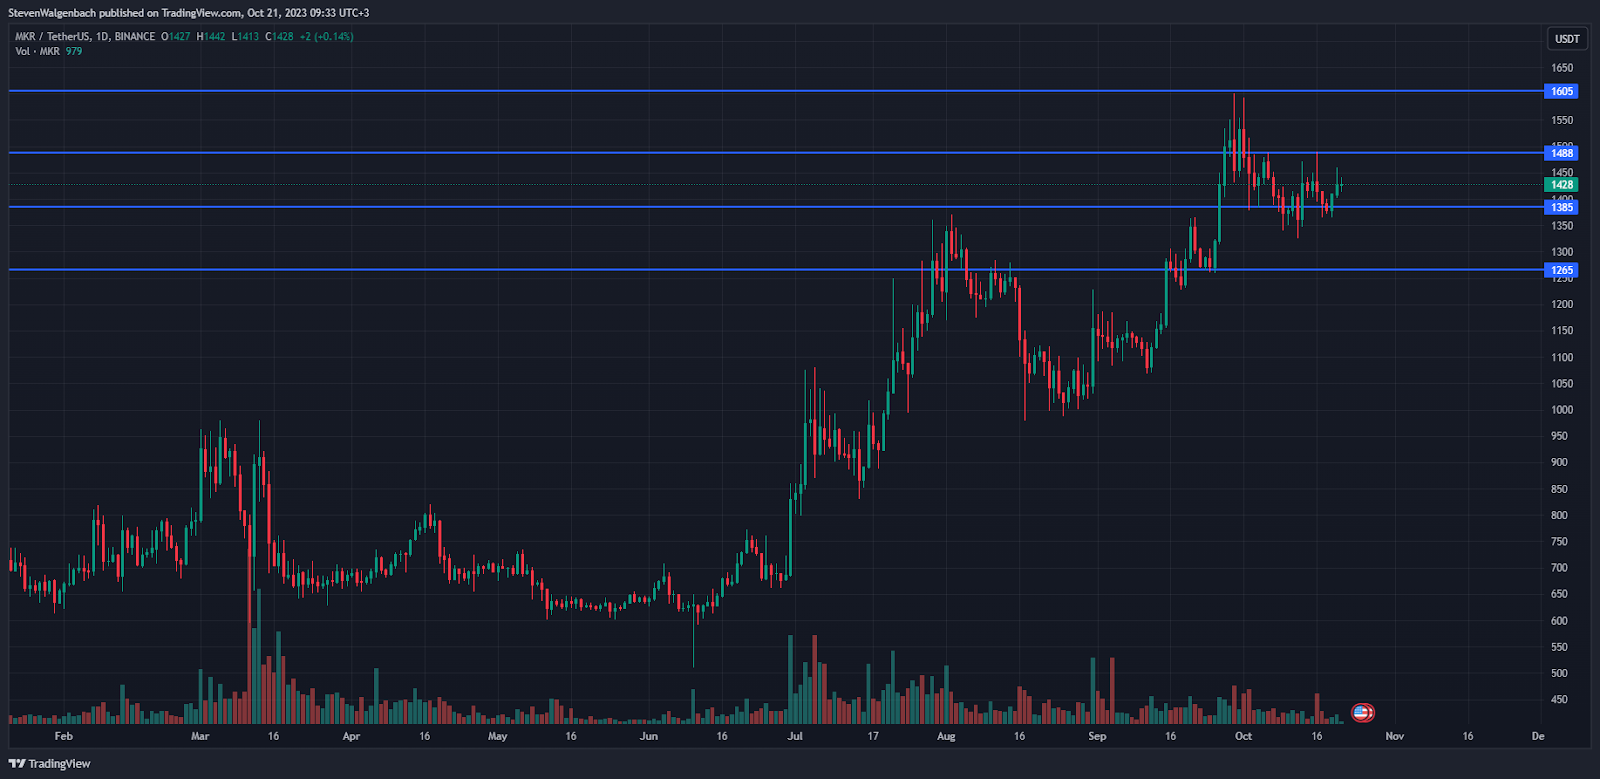 Daily chart for MKR/USDT (Source: TradingView)